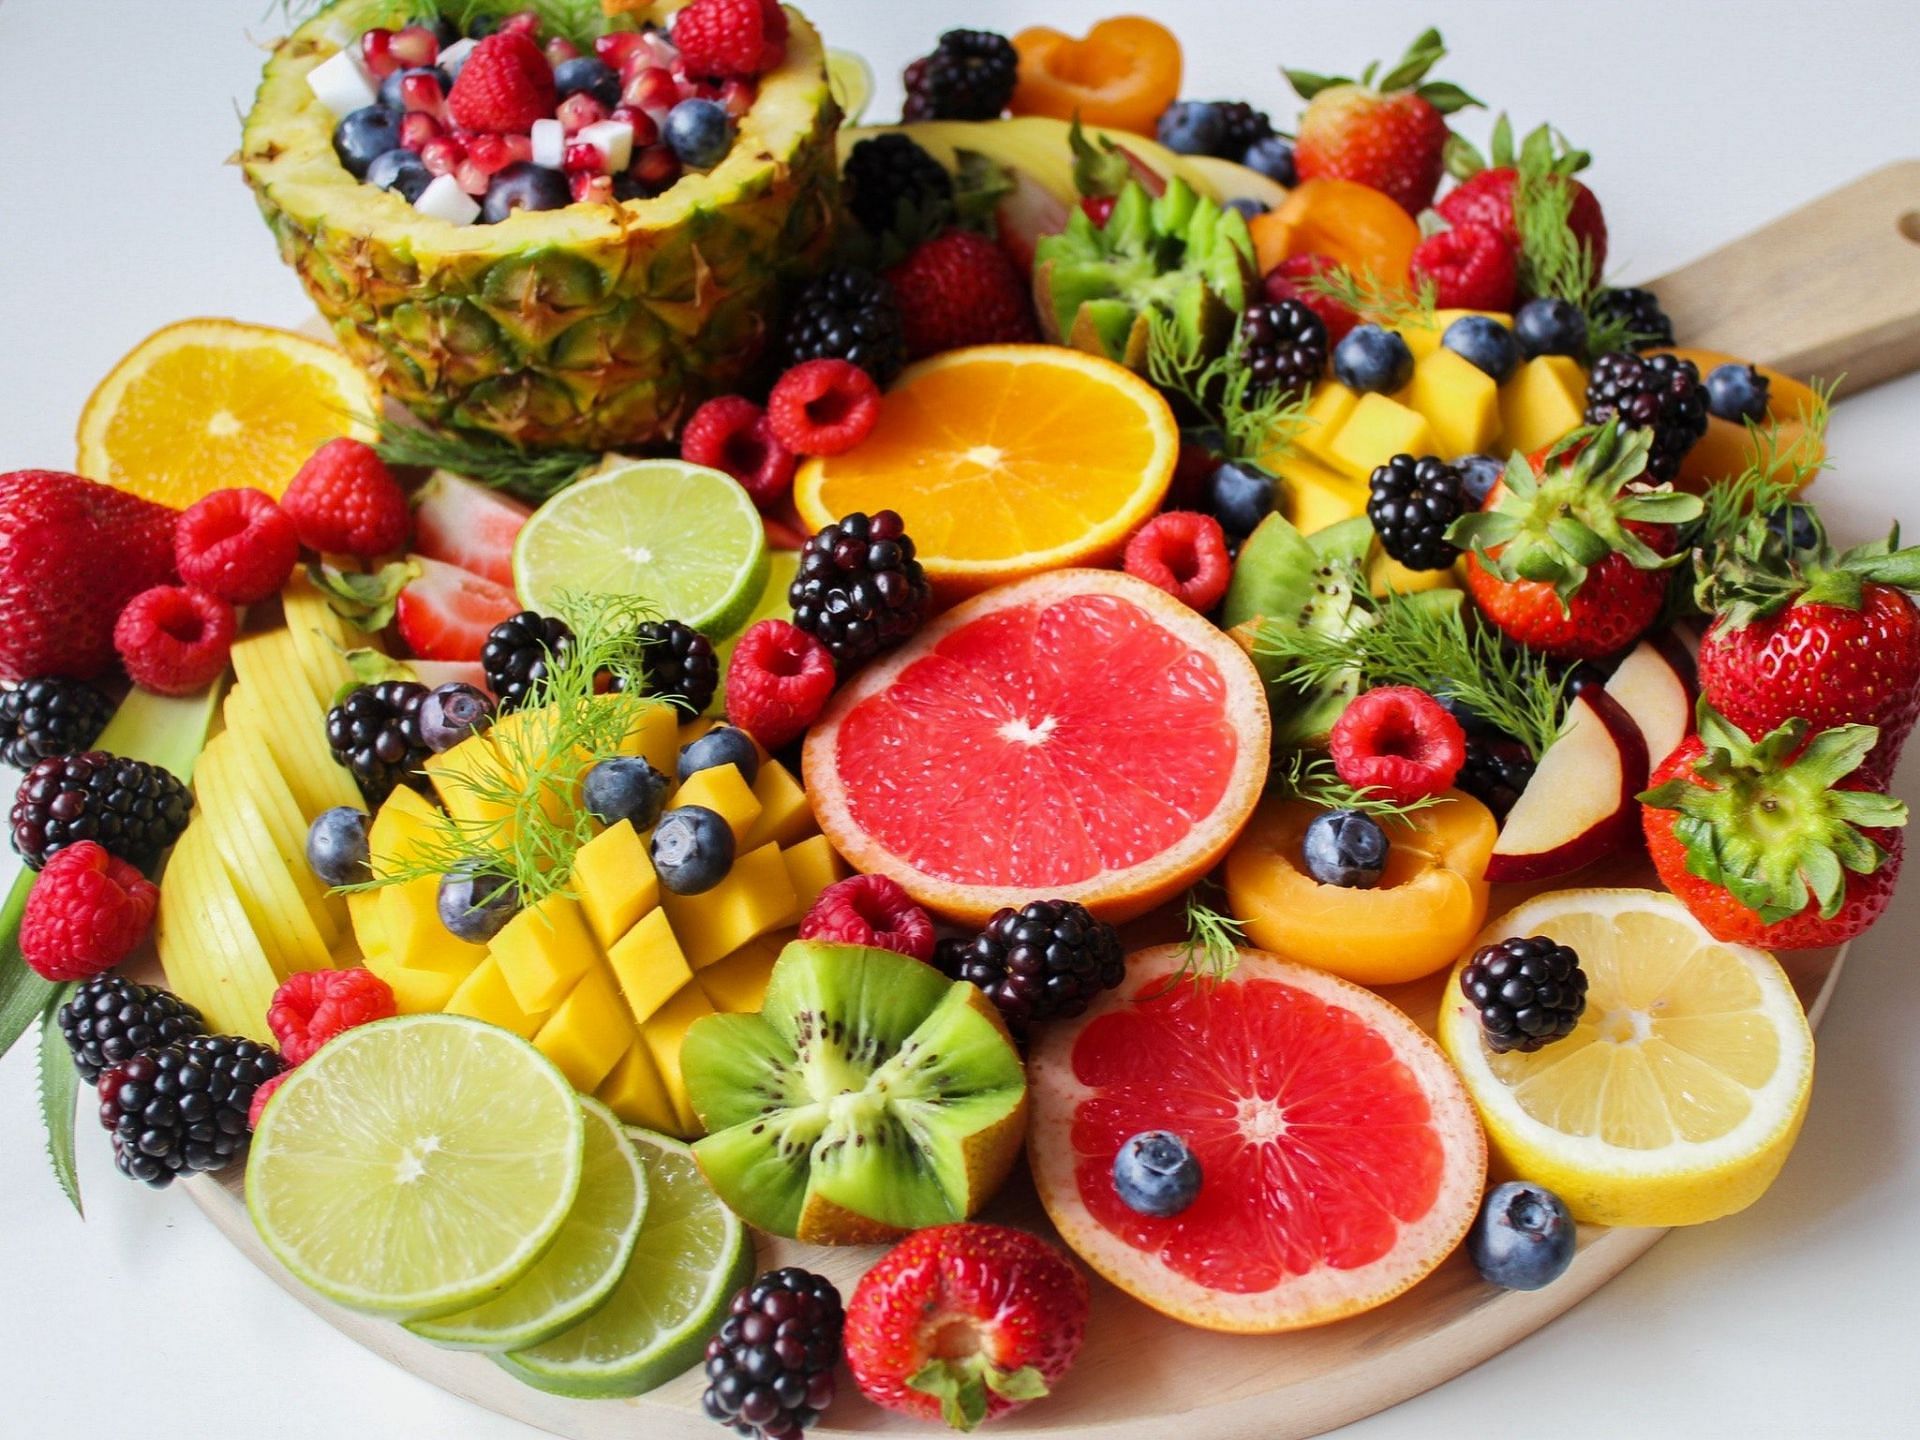 Healthy fruits for diet (Image source/ Pexels)